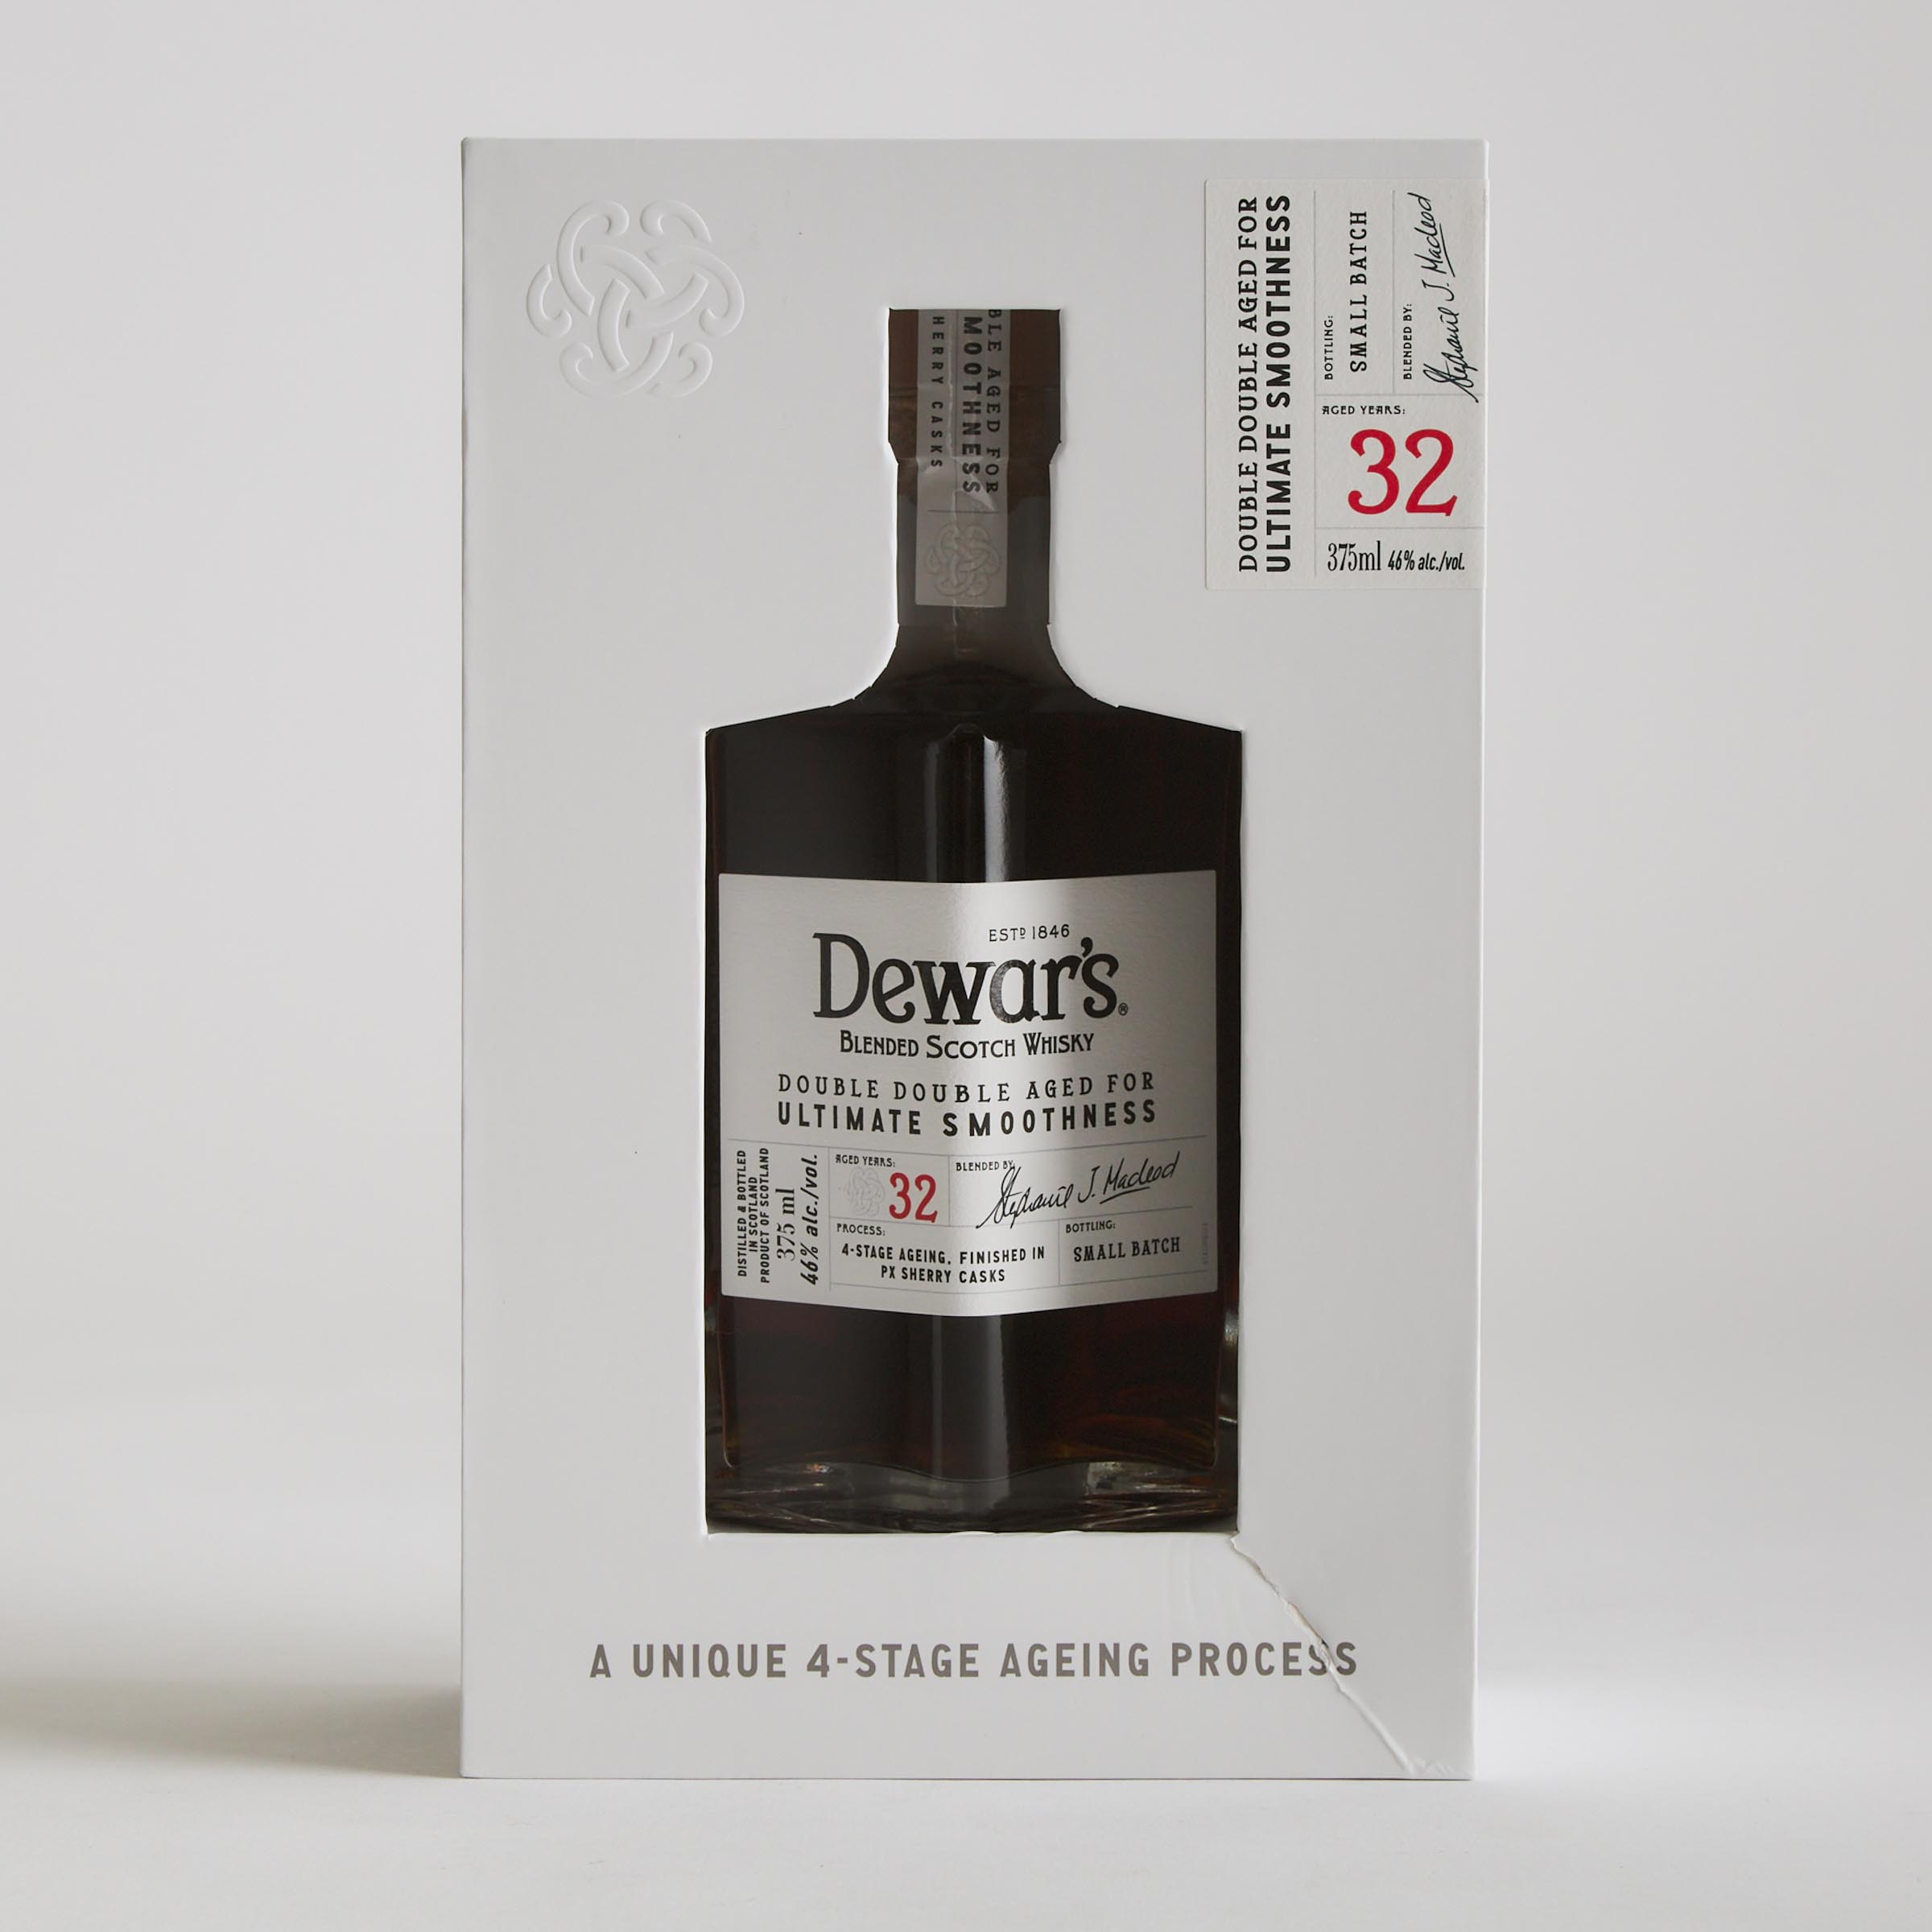 DEWAR'S BLENDED SCOTCH WHISKY 32 YEARS (ONE 375 ML)